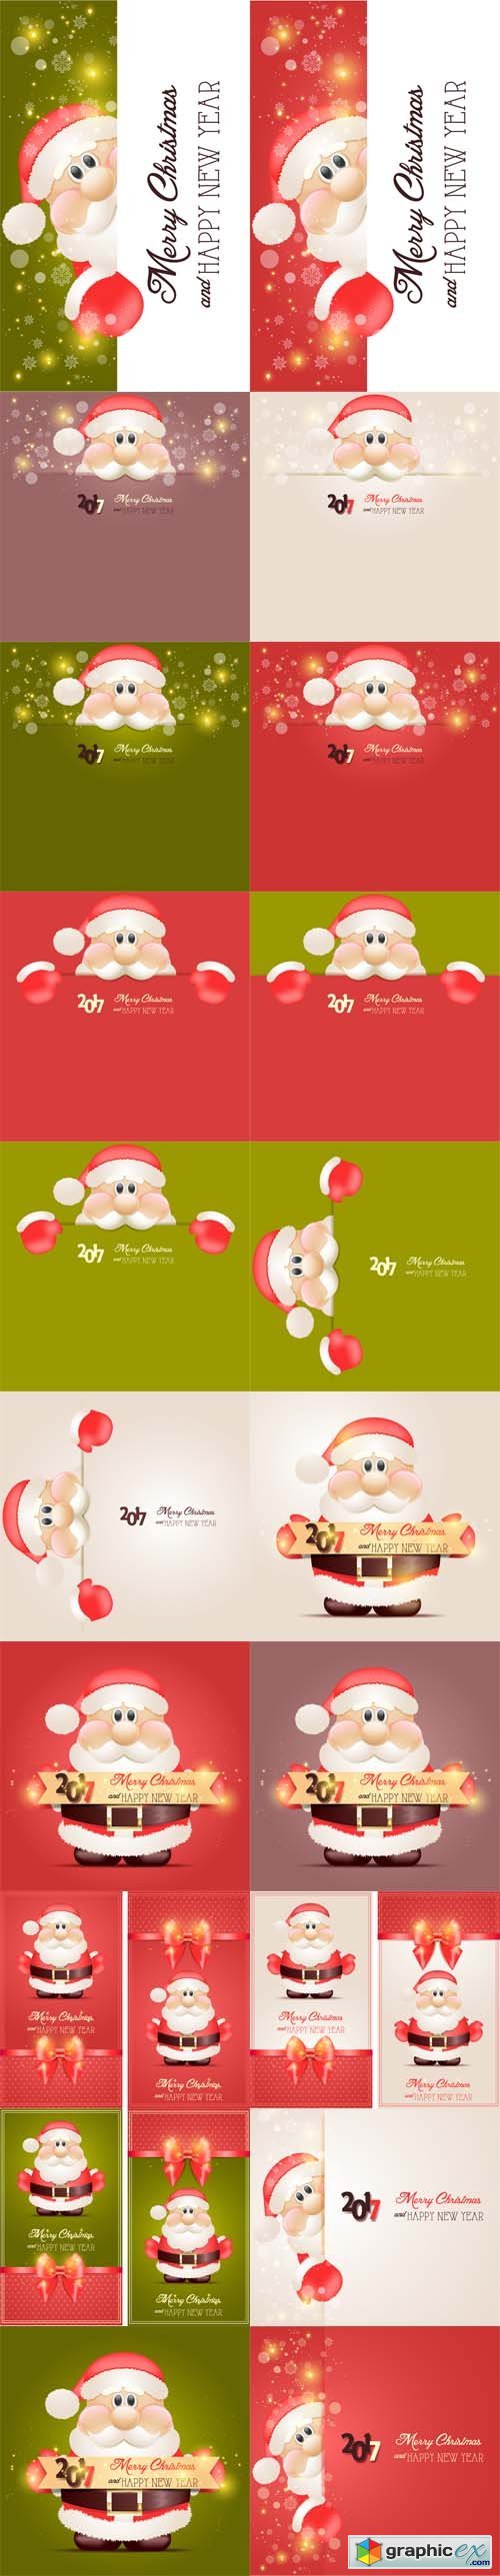 Santa Claus Backgrounds and Banners 2017